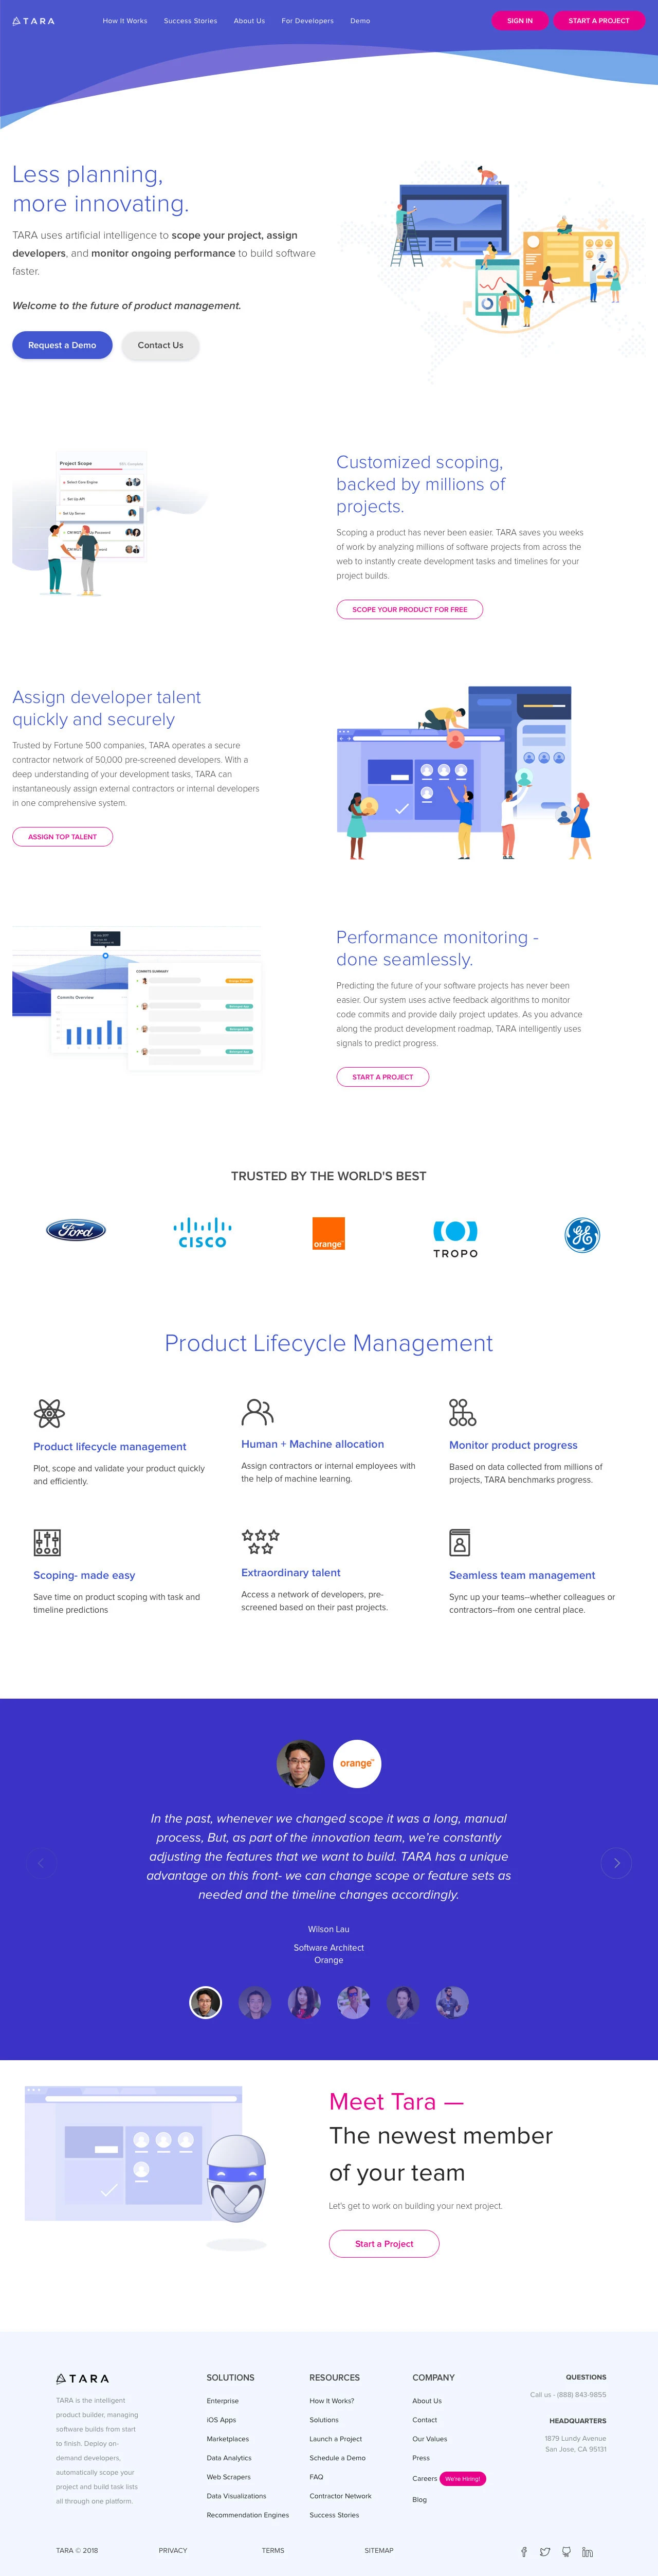 TARA Landing Page Example: TARA uses artificial intelligence to scope your project, assign developers, and monitor ongoing performance to build software faster.